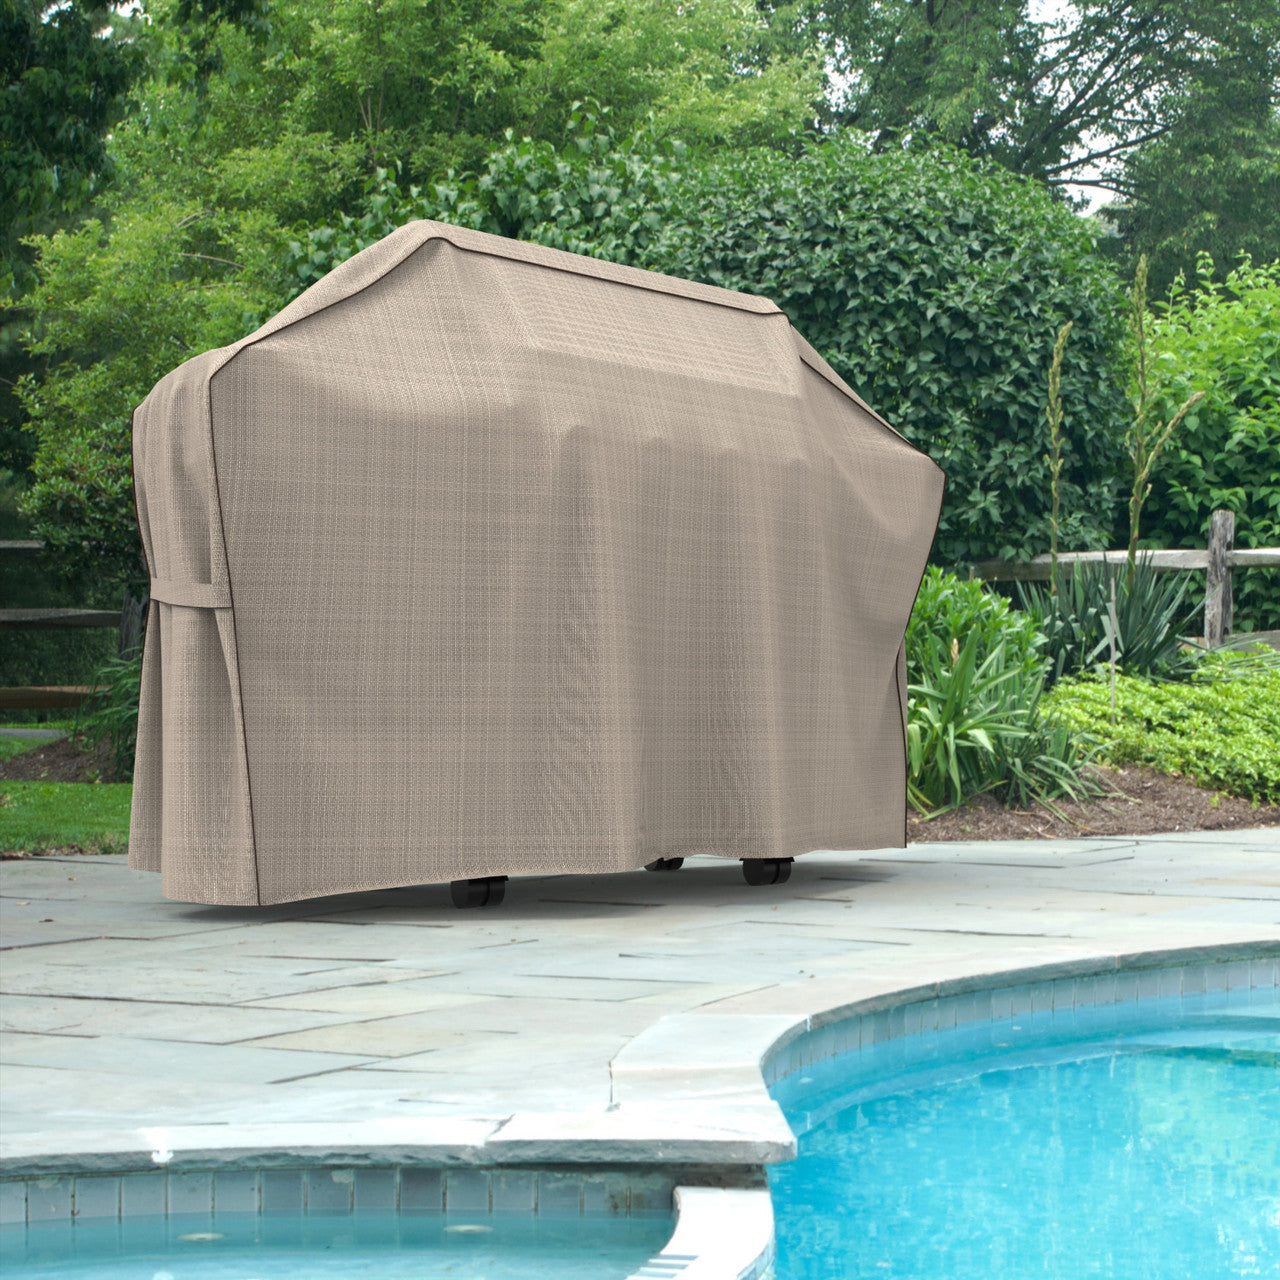 Budge Industries English Garden BBQ Grill Cover